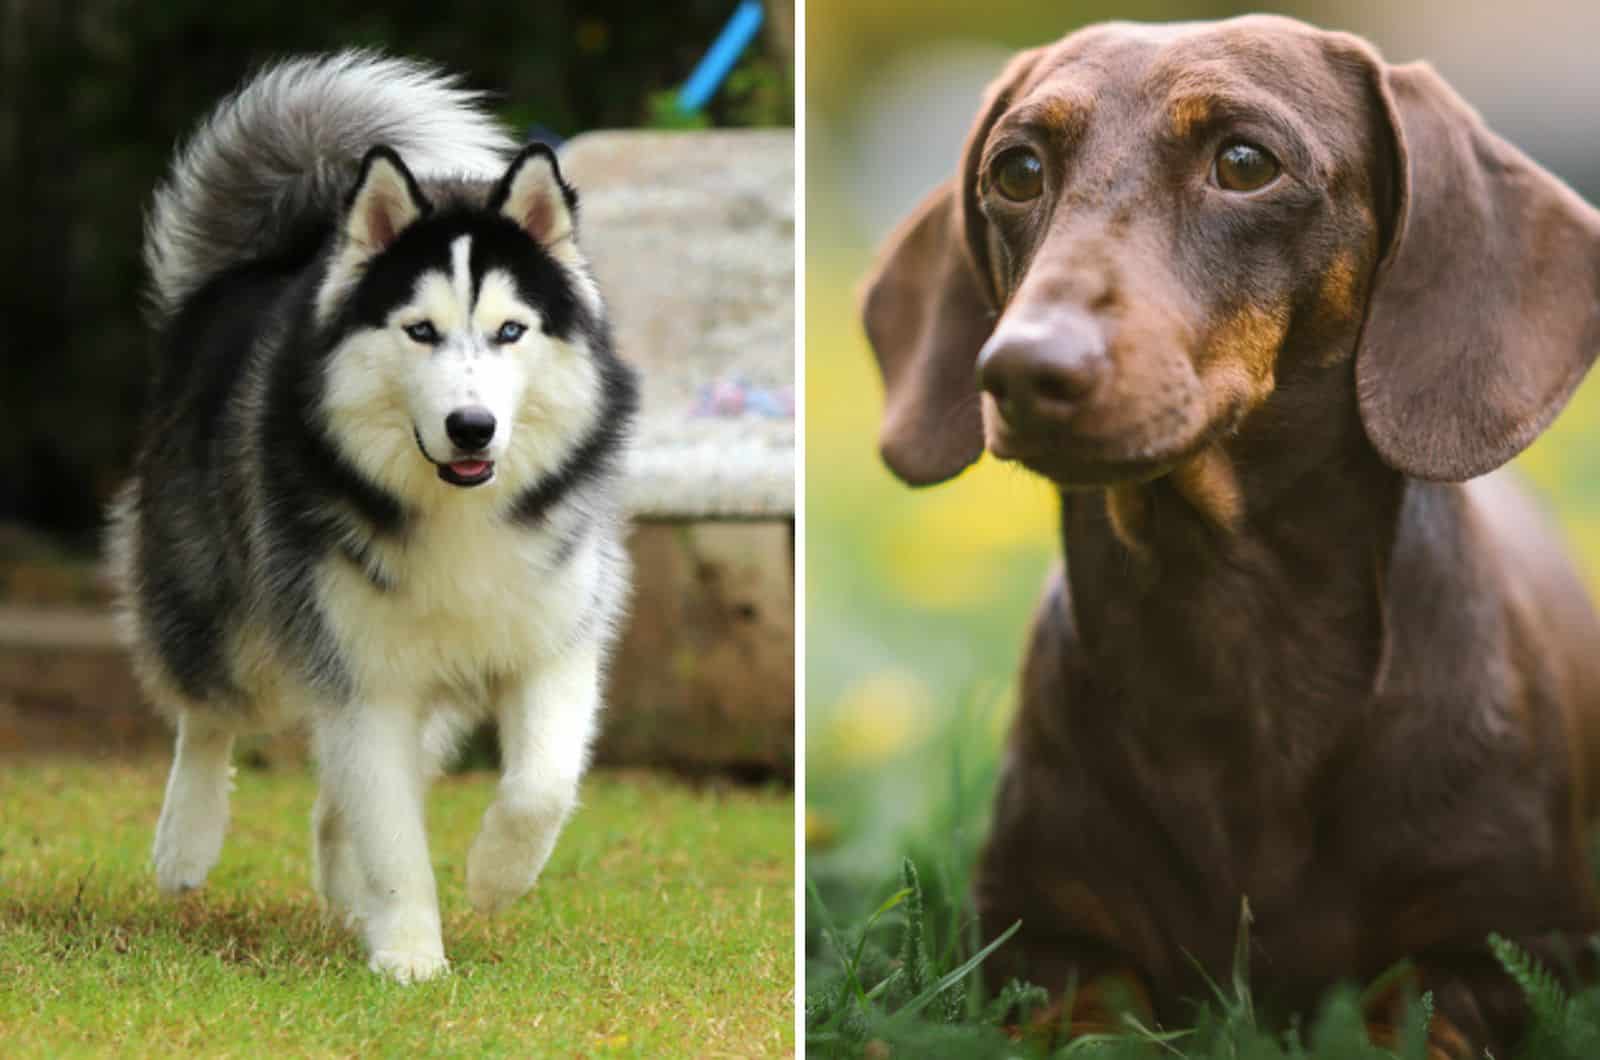 Is The Husky Dachshund Mix The Worst Of All Husky Mixes?